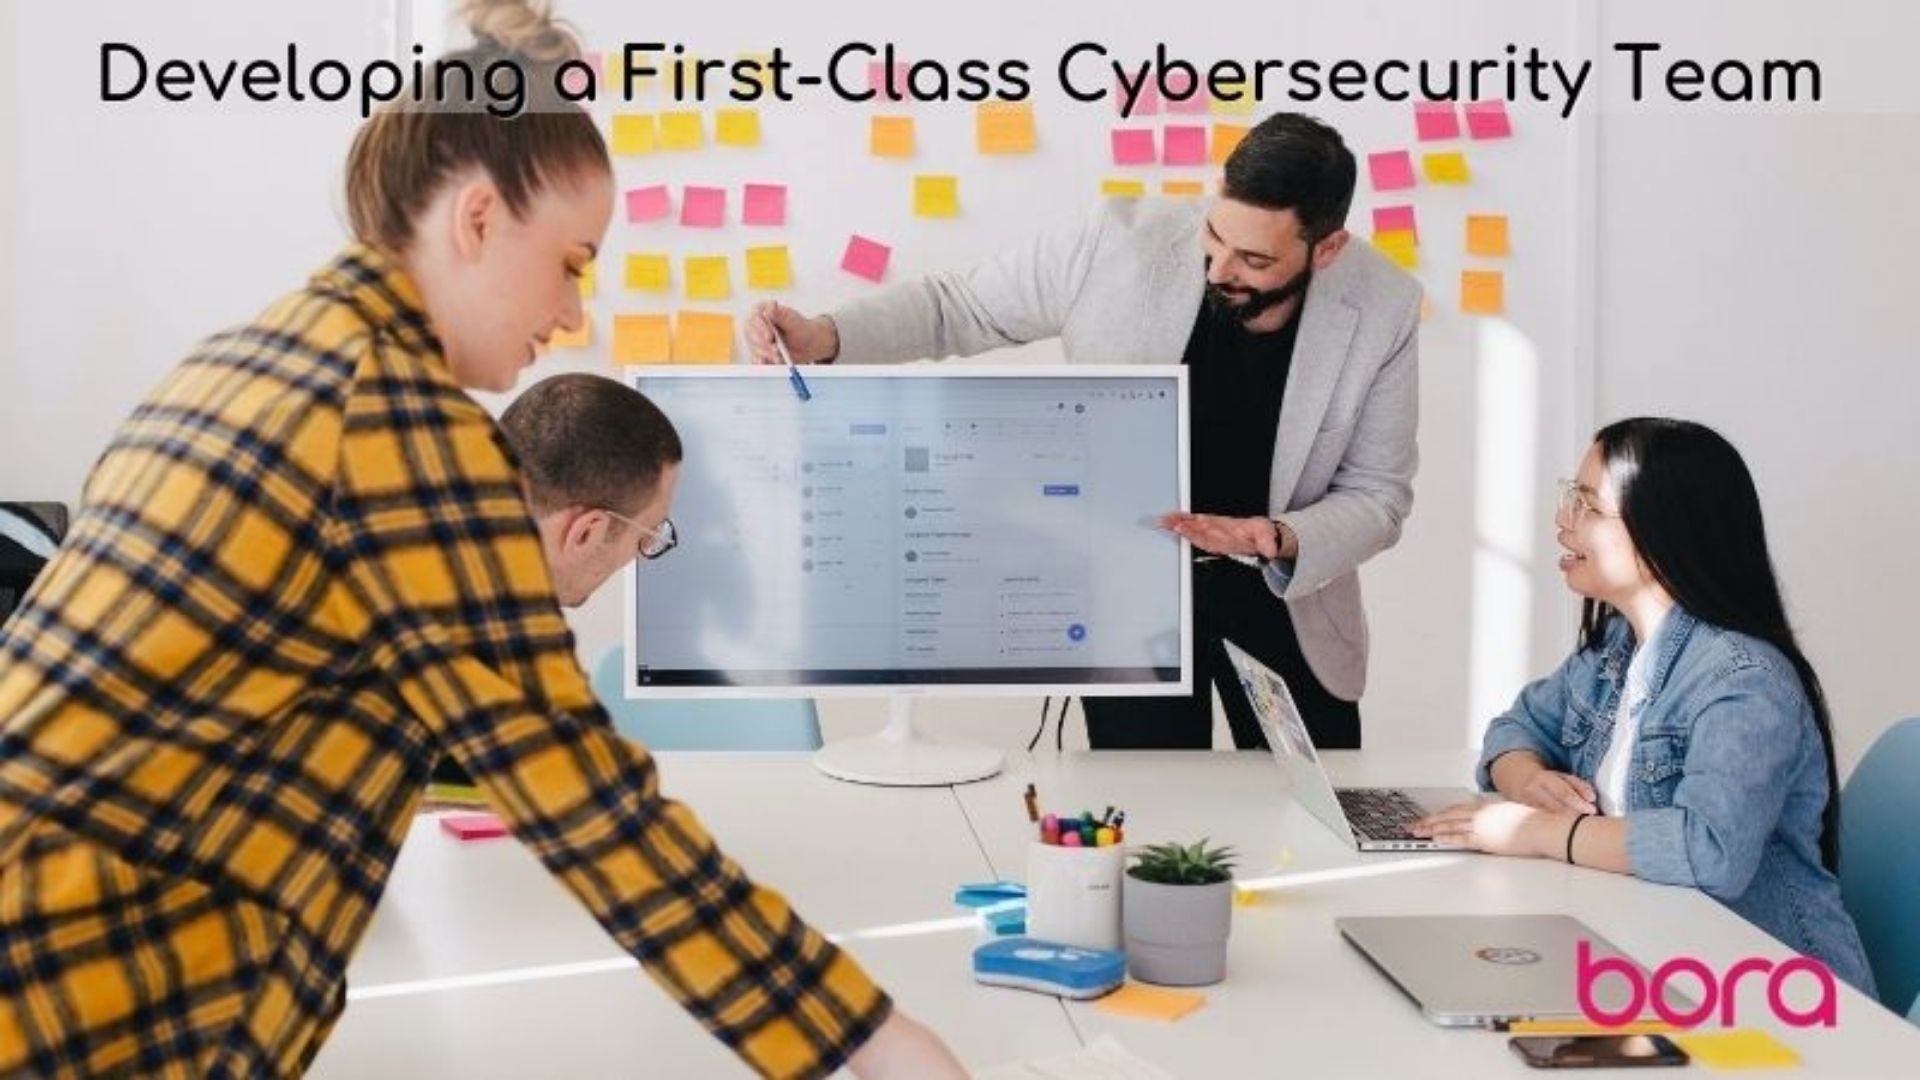 Developing a First-Class Cybersecurity Team